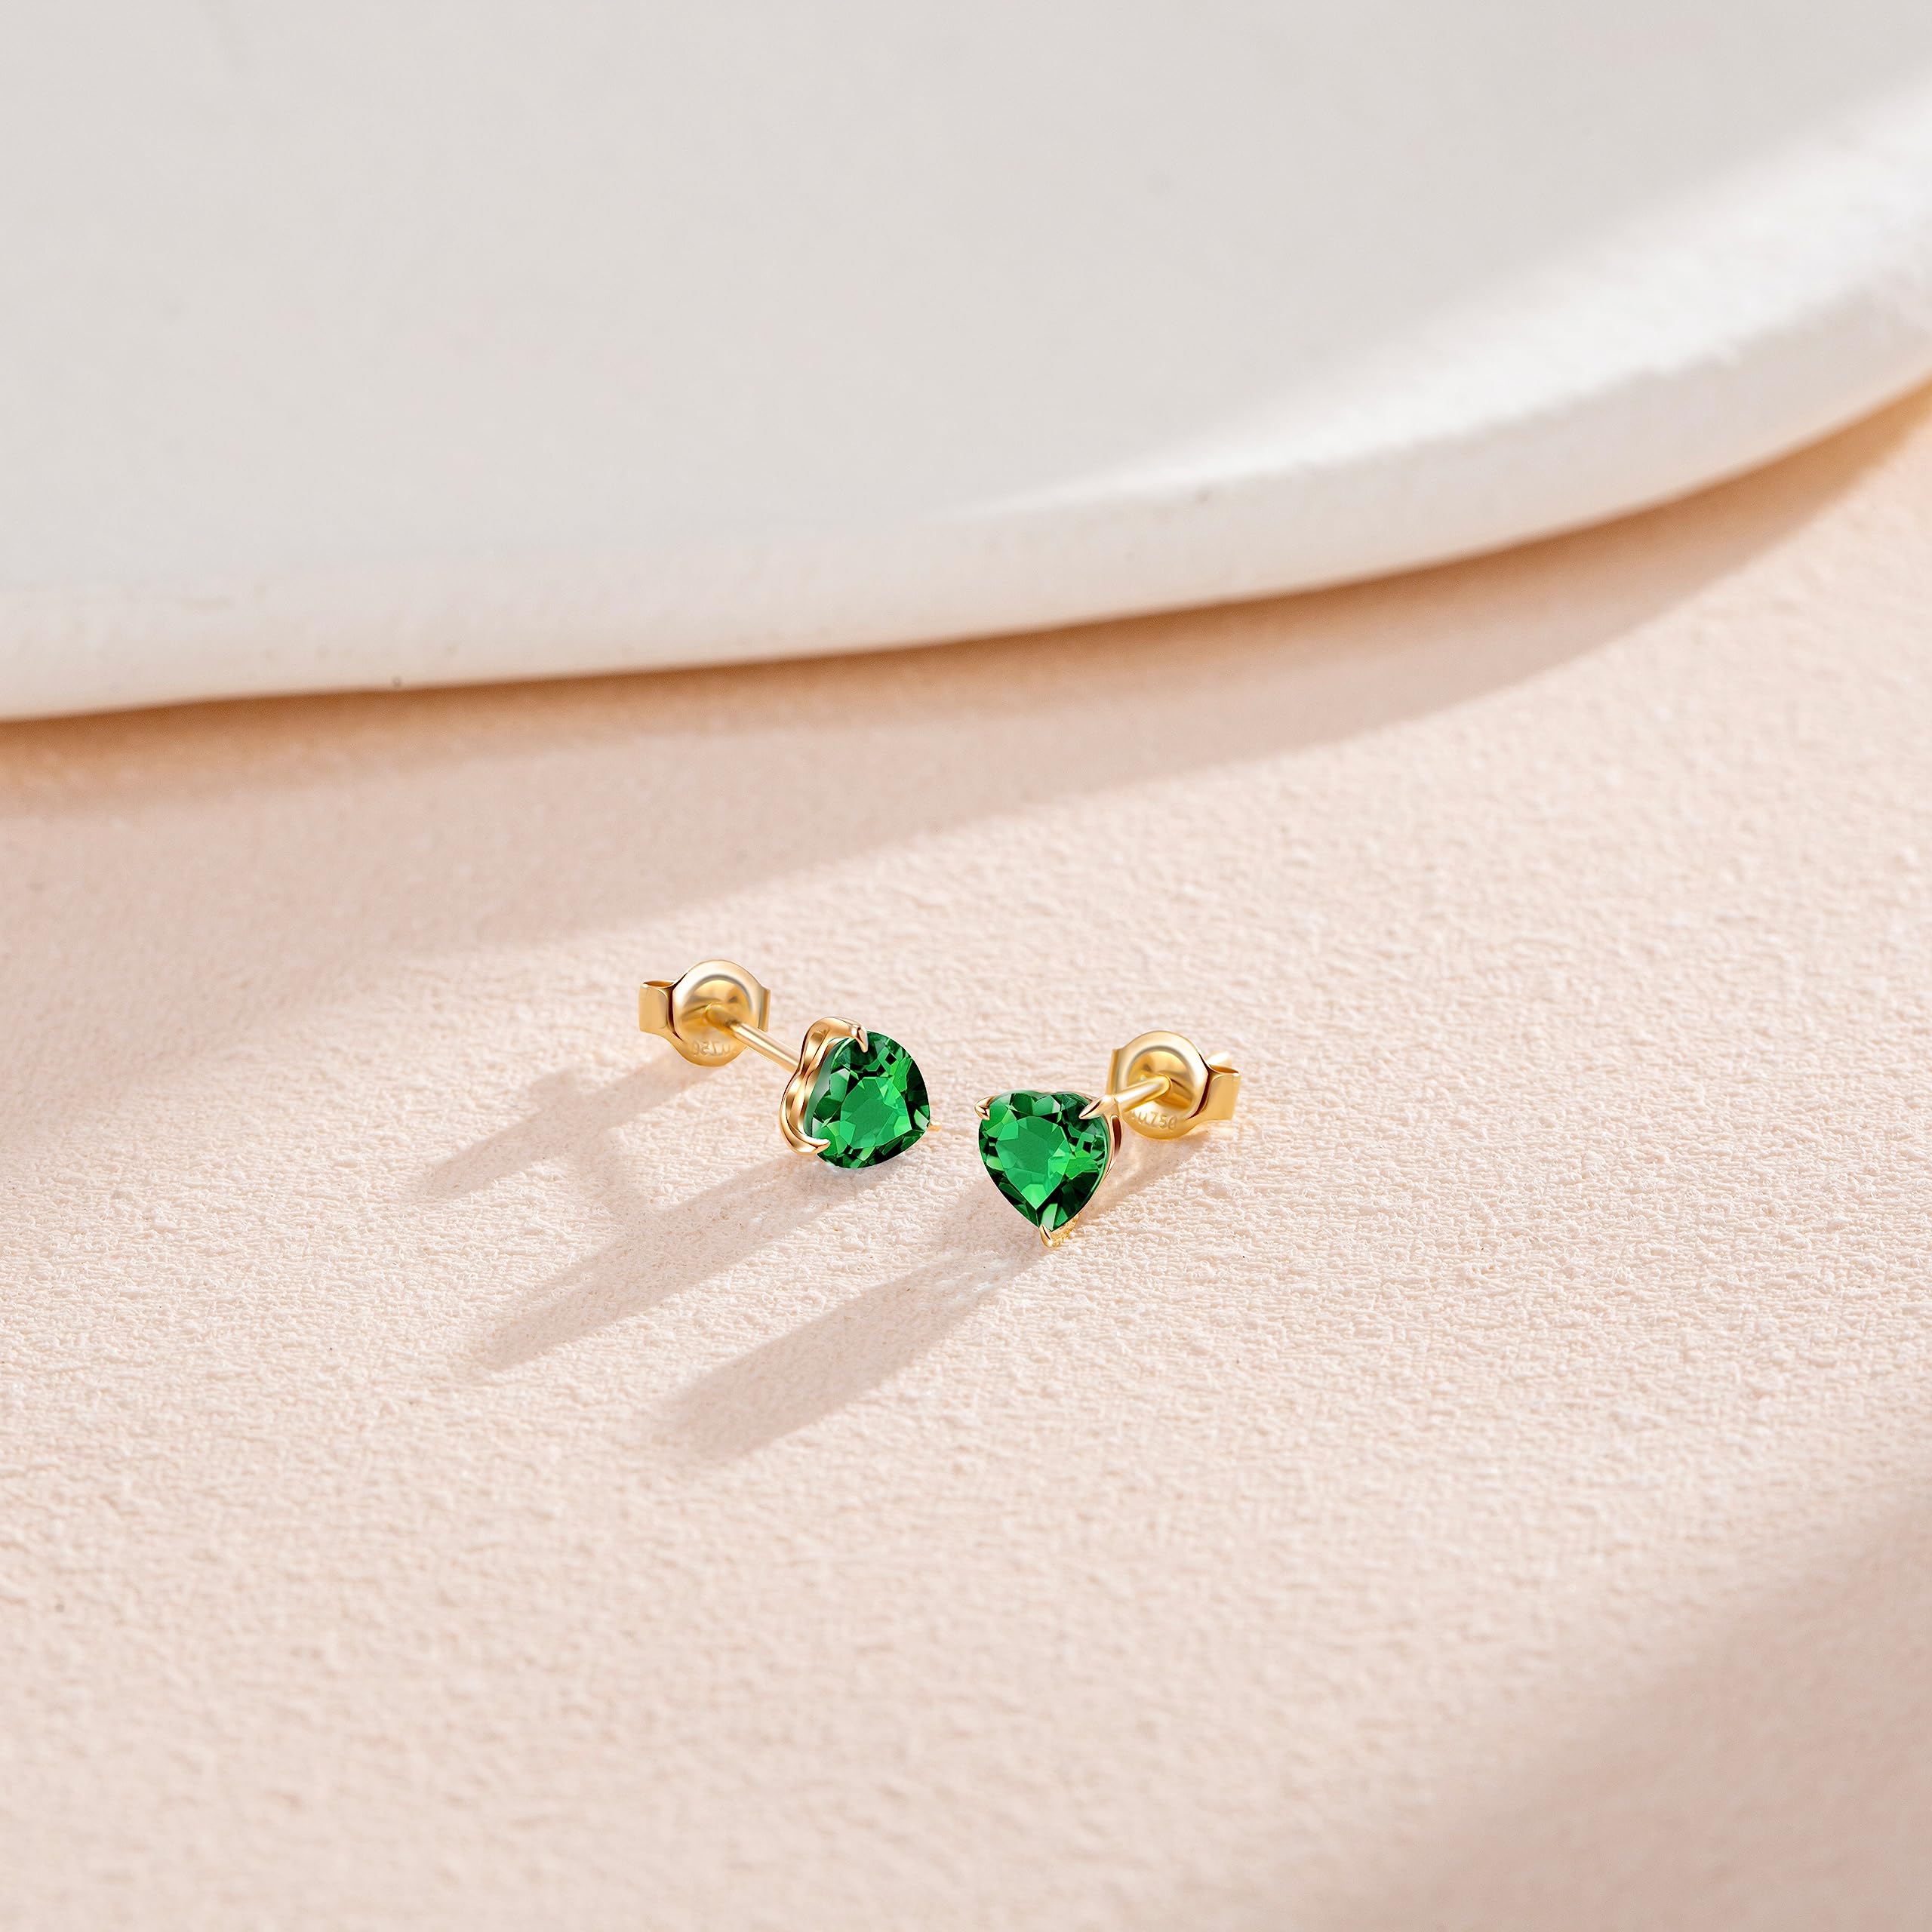 FANCIME 14k Solid Yellow Gold Stud Earrings 1.25cttw Genuine Natural Gemstone Prong Cluster Stud Earrings Fine Jewelry Gifts for Her Mom Women Girlfriend Wife